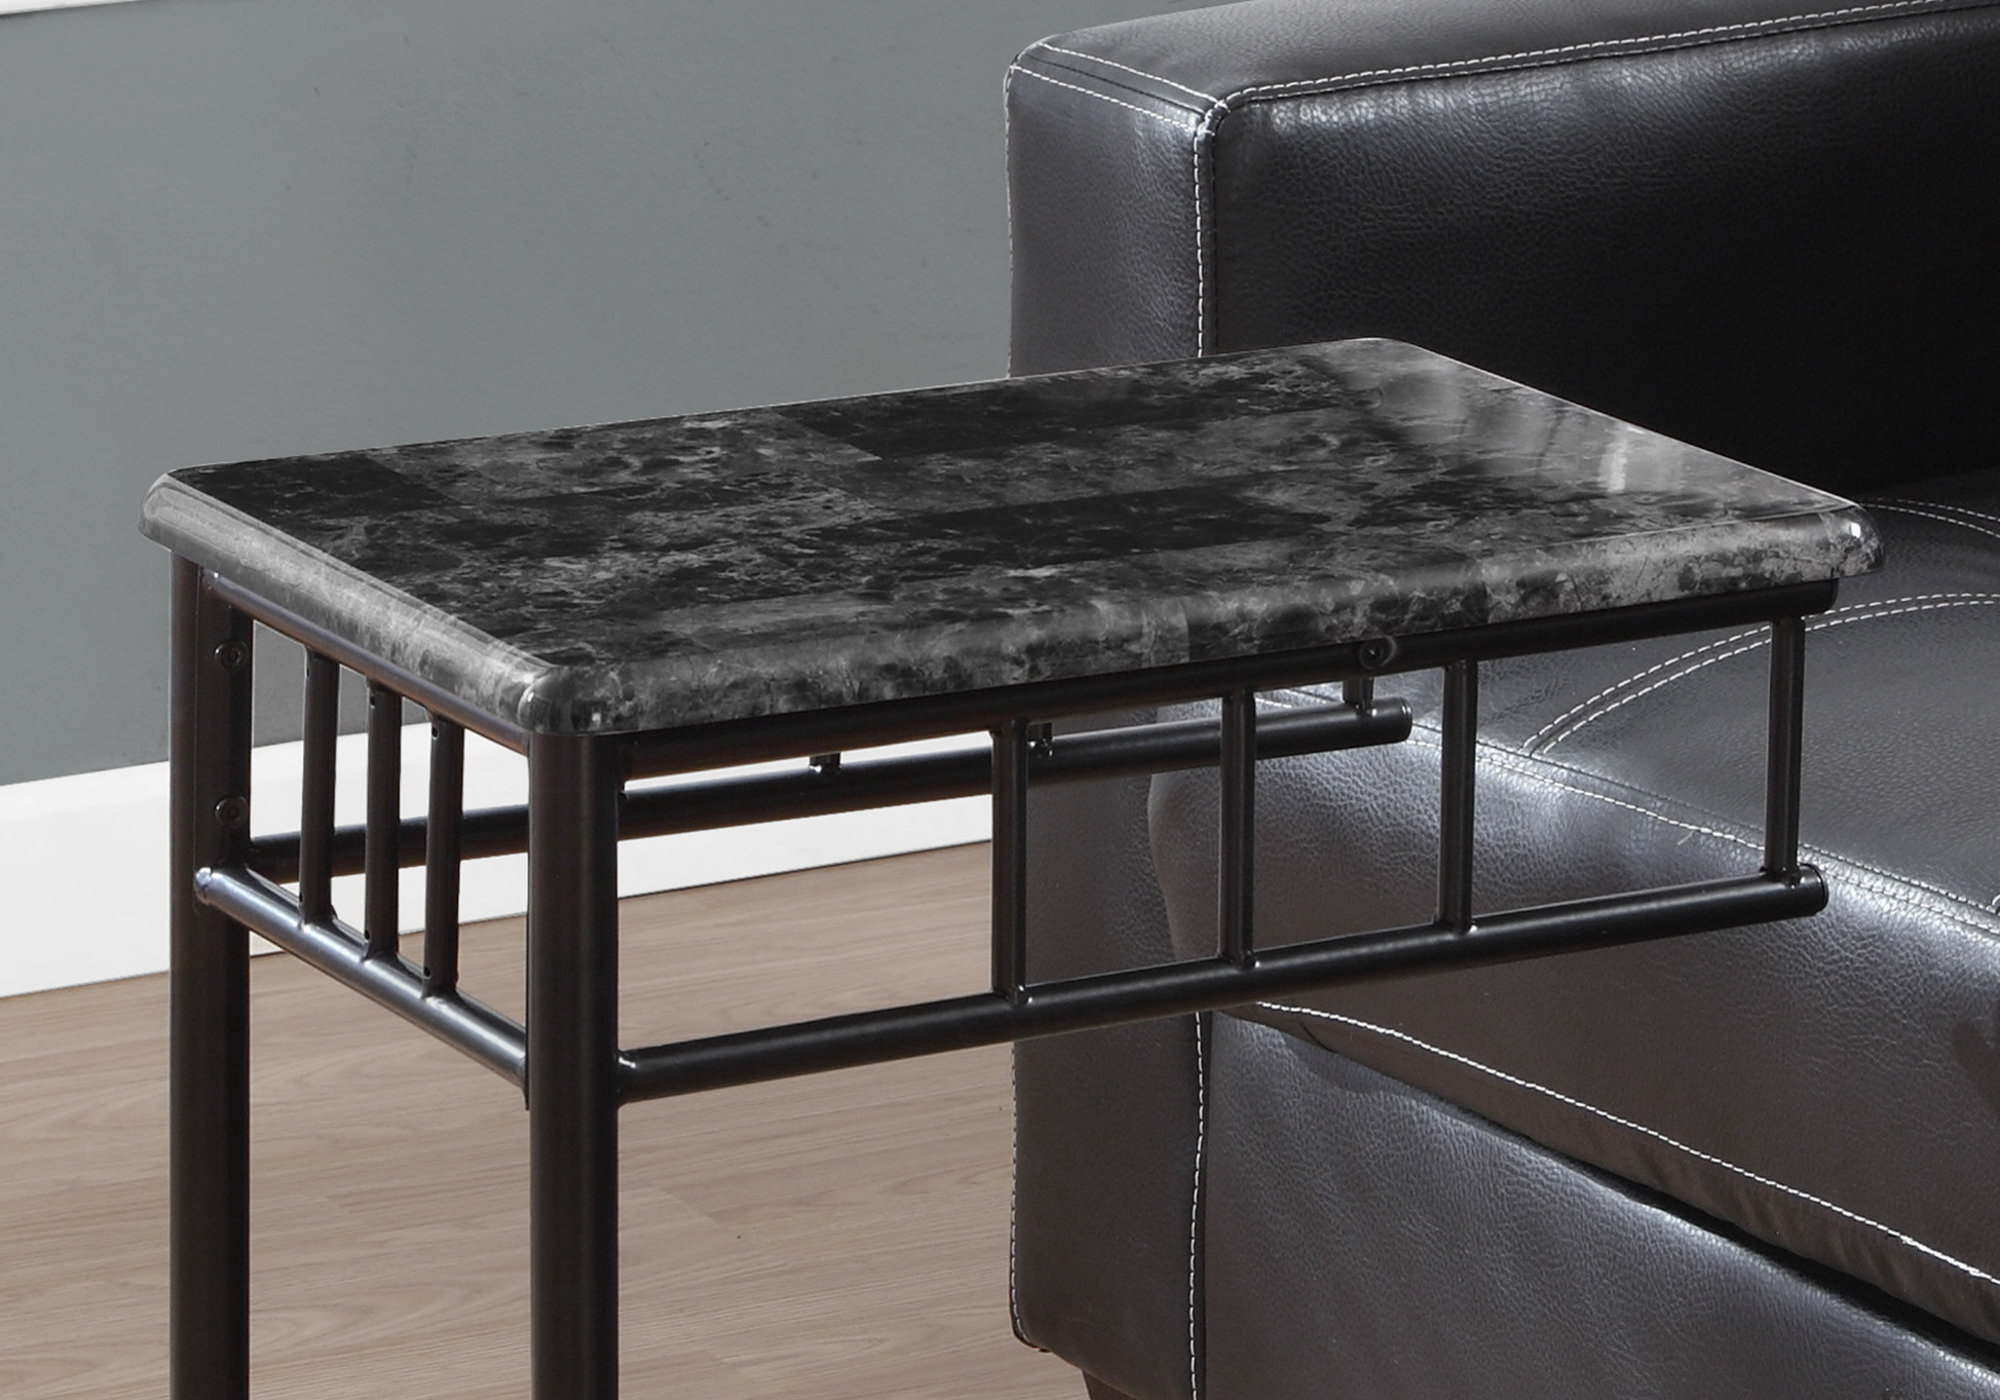 ACCENT TABLE - GREY MARBLE / CHARCOAL METAL